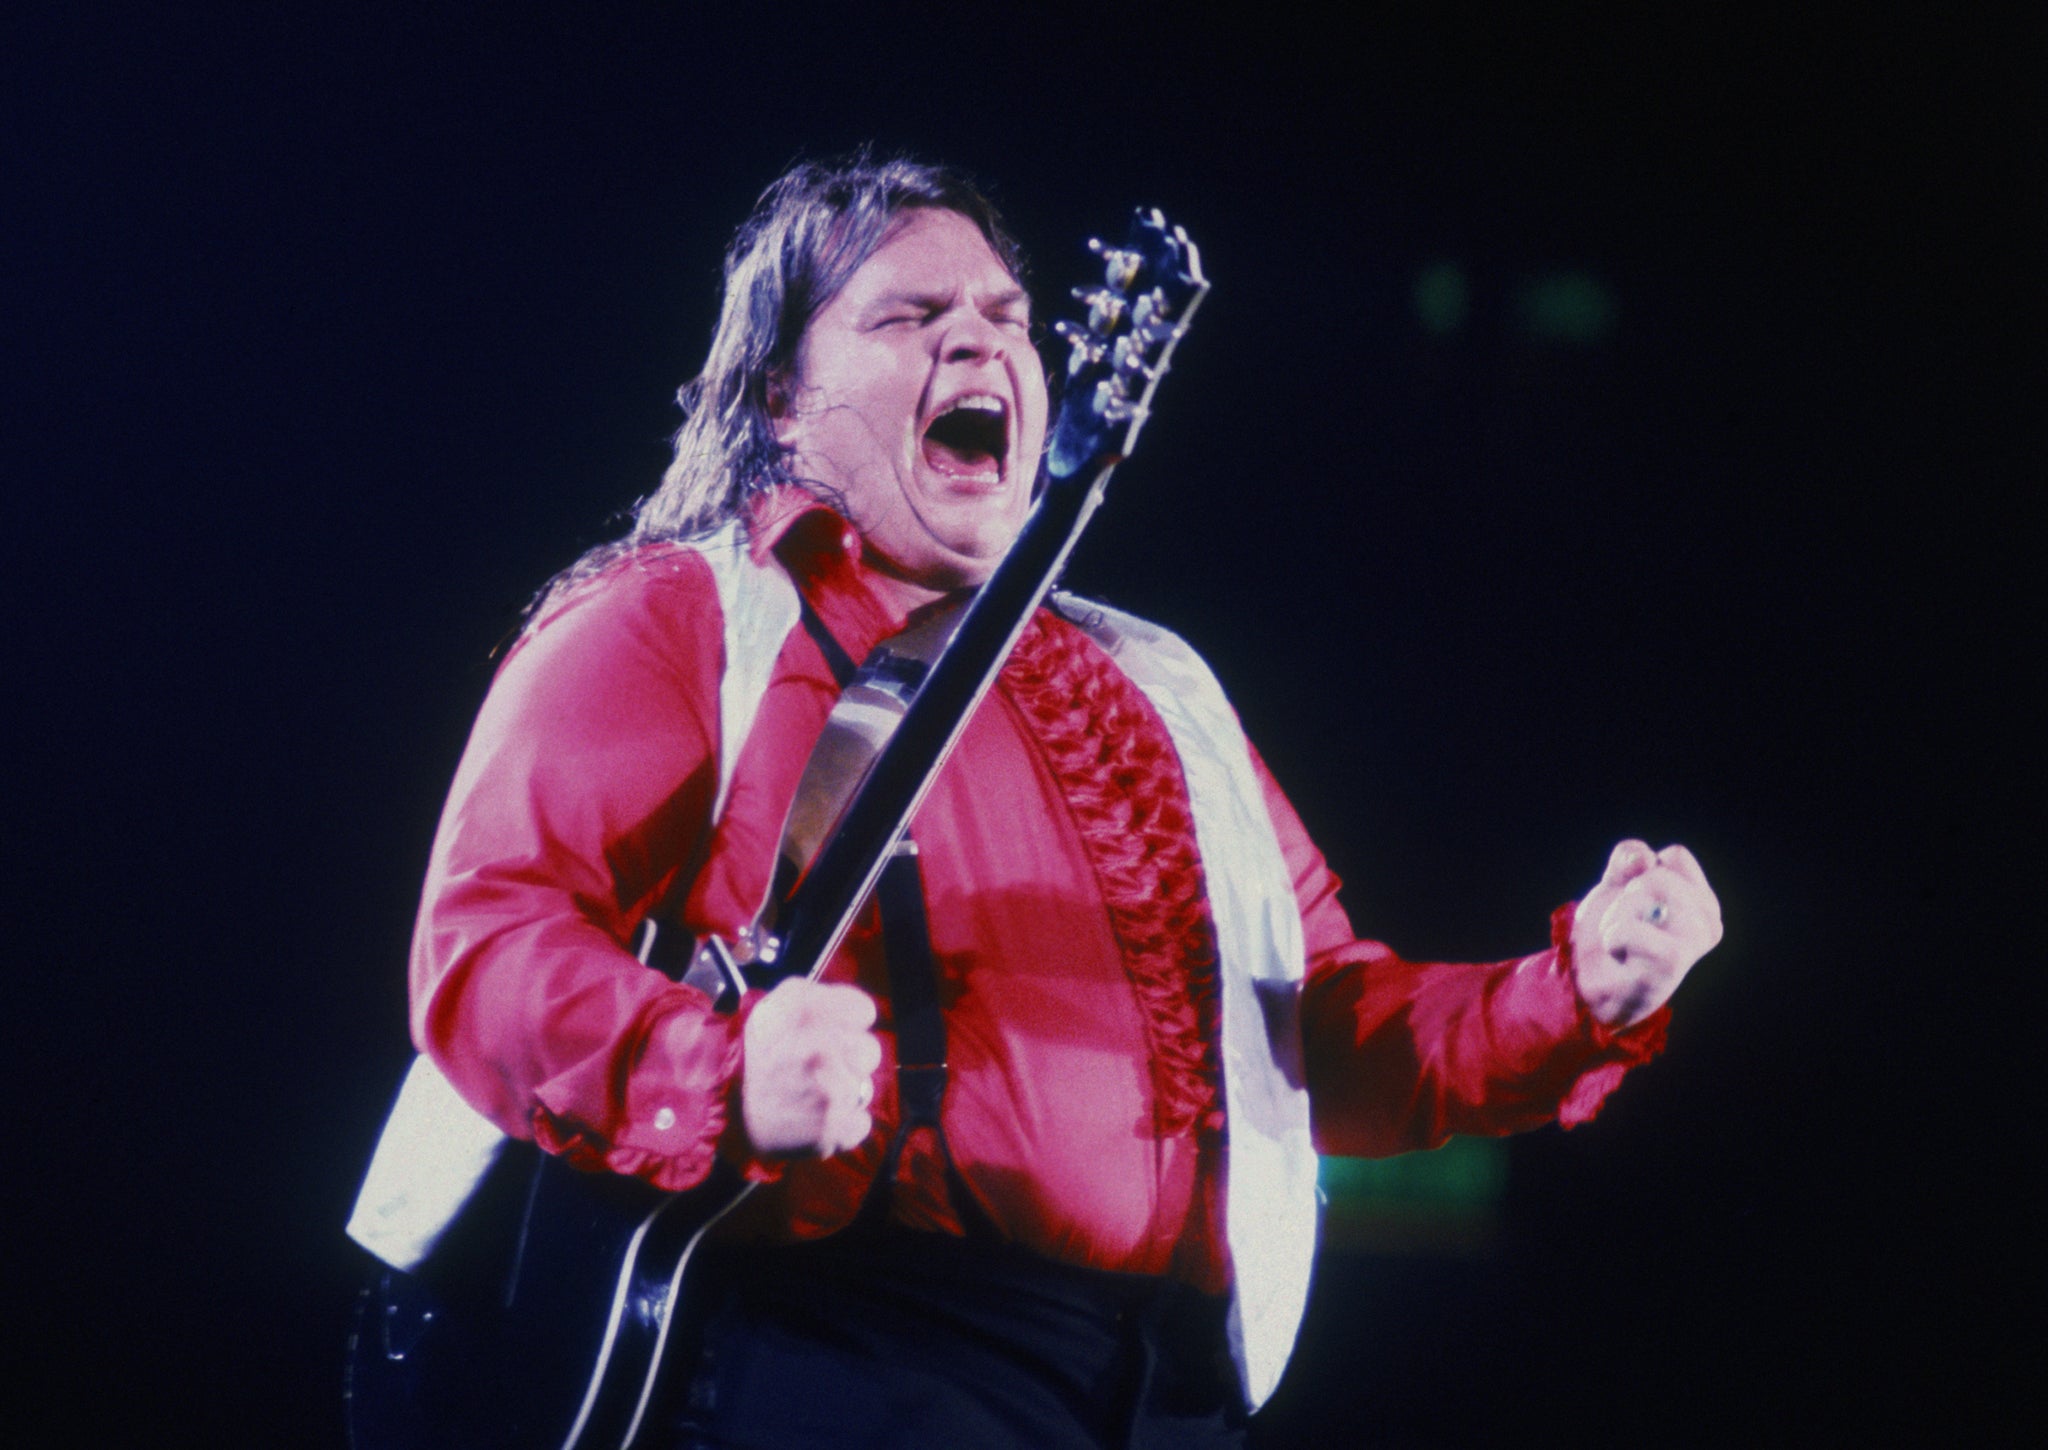 Meat Loaf confirmed for a second run of Las Vegas rock shows | The ...